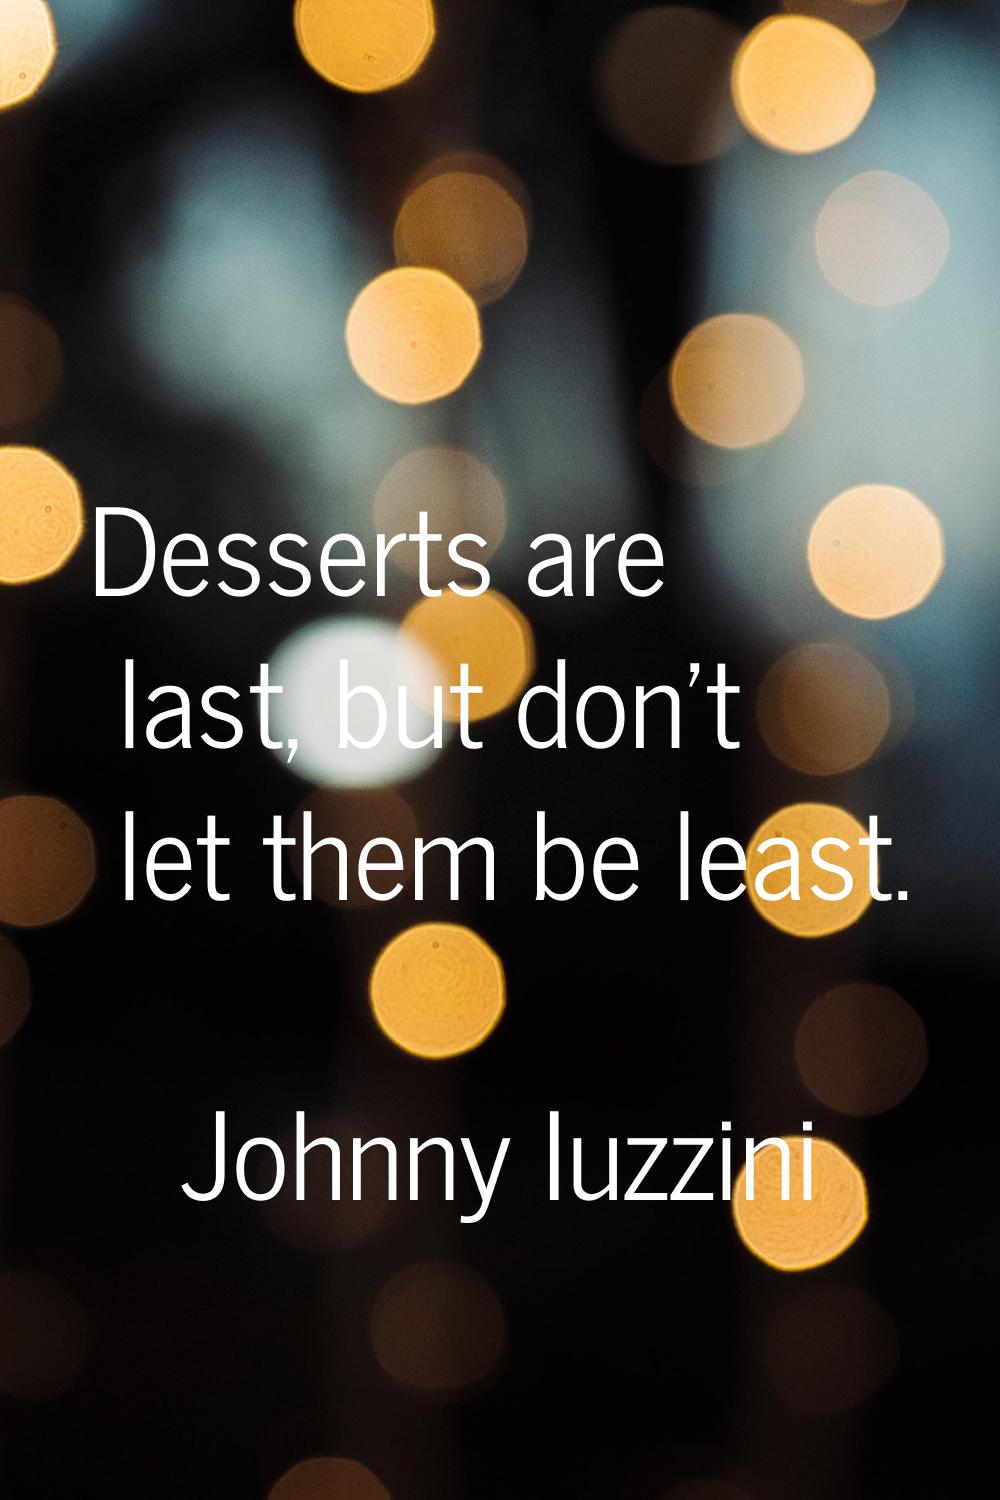 Desserts are last, but don't let them be least.